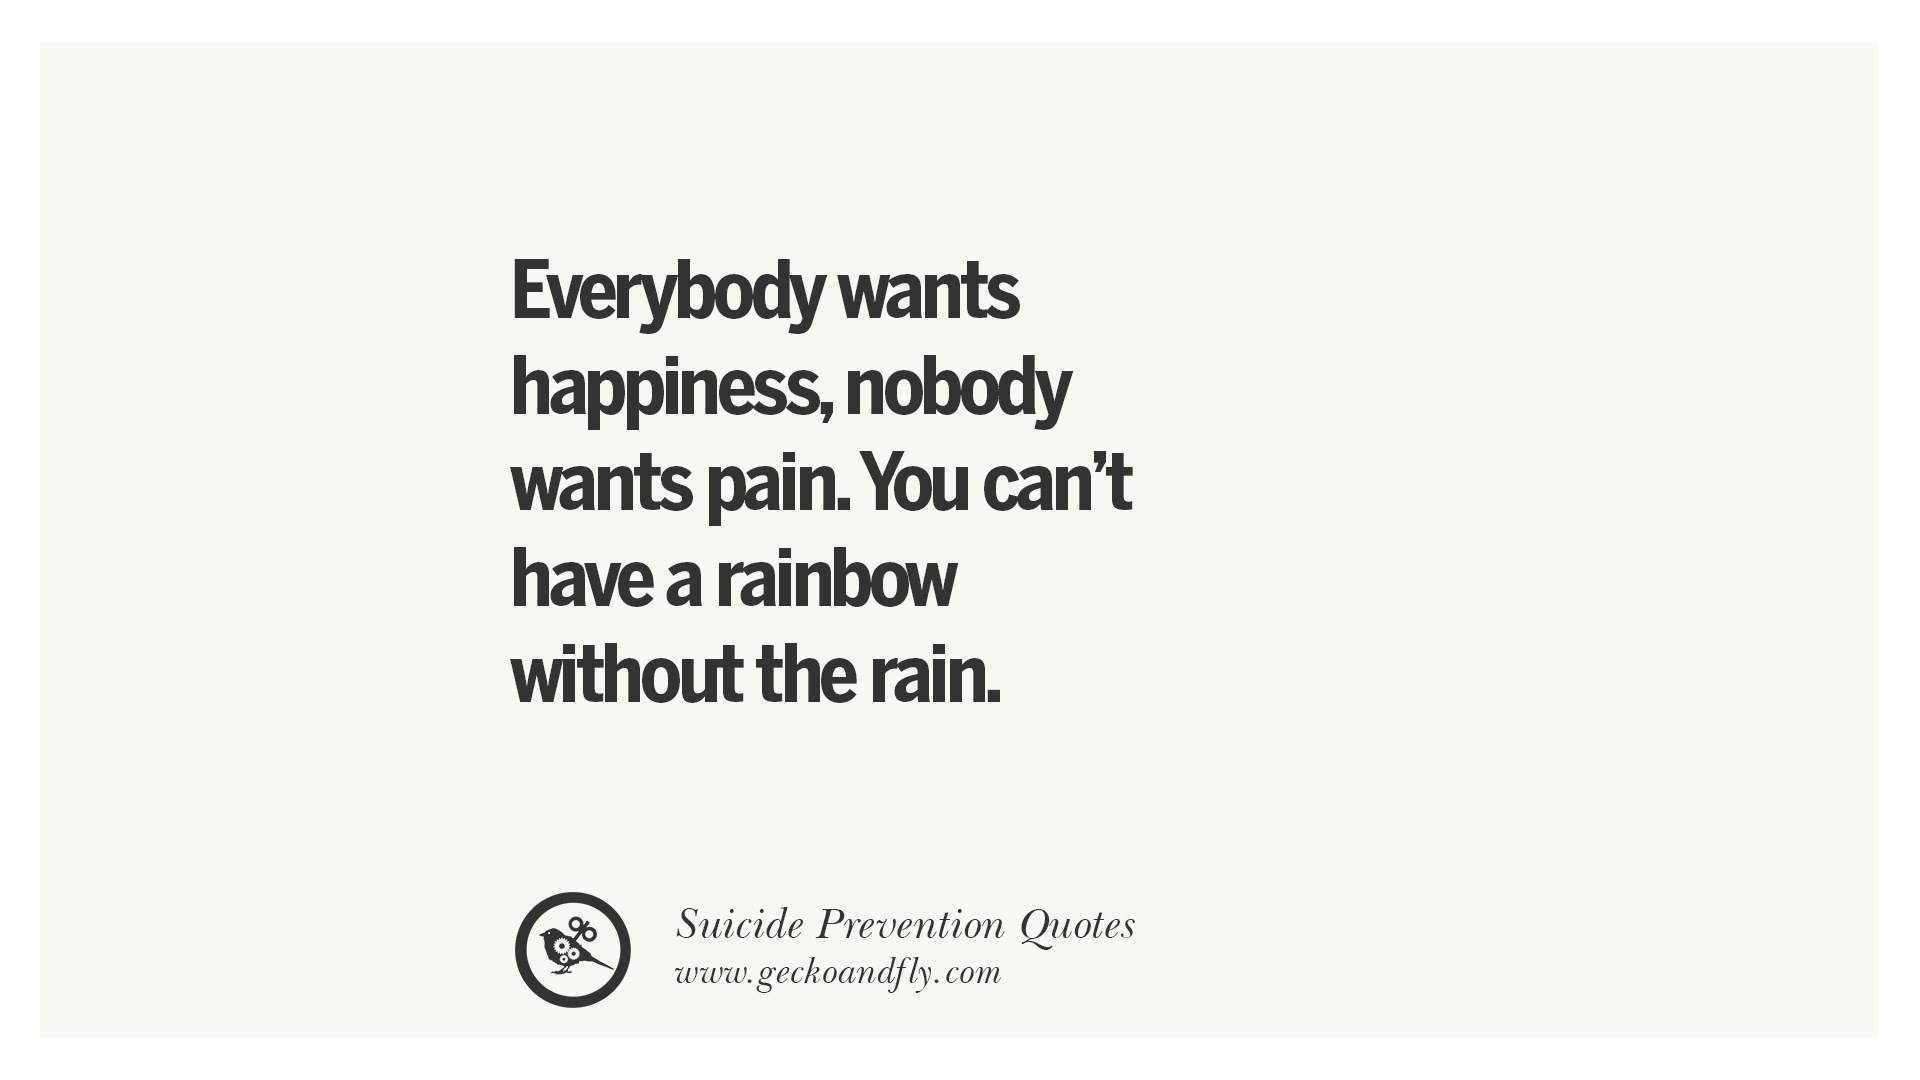 Everybody wanted to know. "Everybody wants Happiness, Nobody wants Pain, but you can't have a Rainbow, without a little Rain". Everyone is Fine Nobody is Happy.